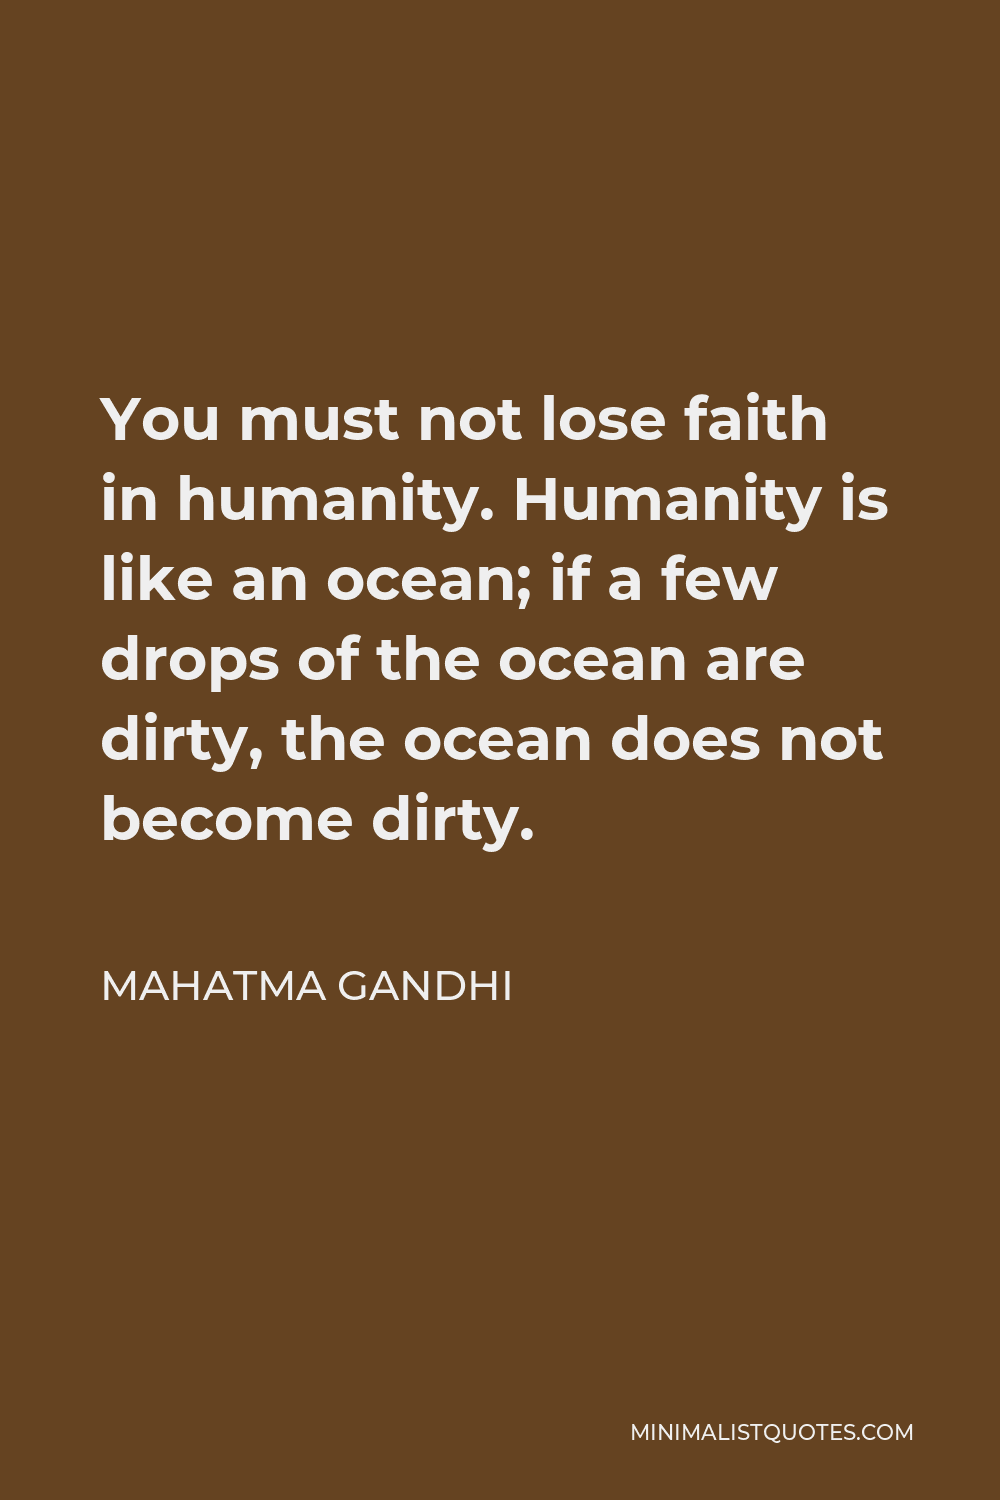 Mahatma Gandhi Quote - You must not lose faith in humanity. Humanity is like an ocean; if a few drops of the ocean are dirty, the ocean does not become dirty.